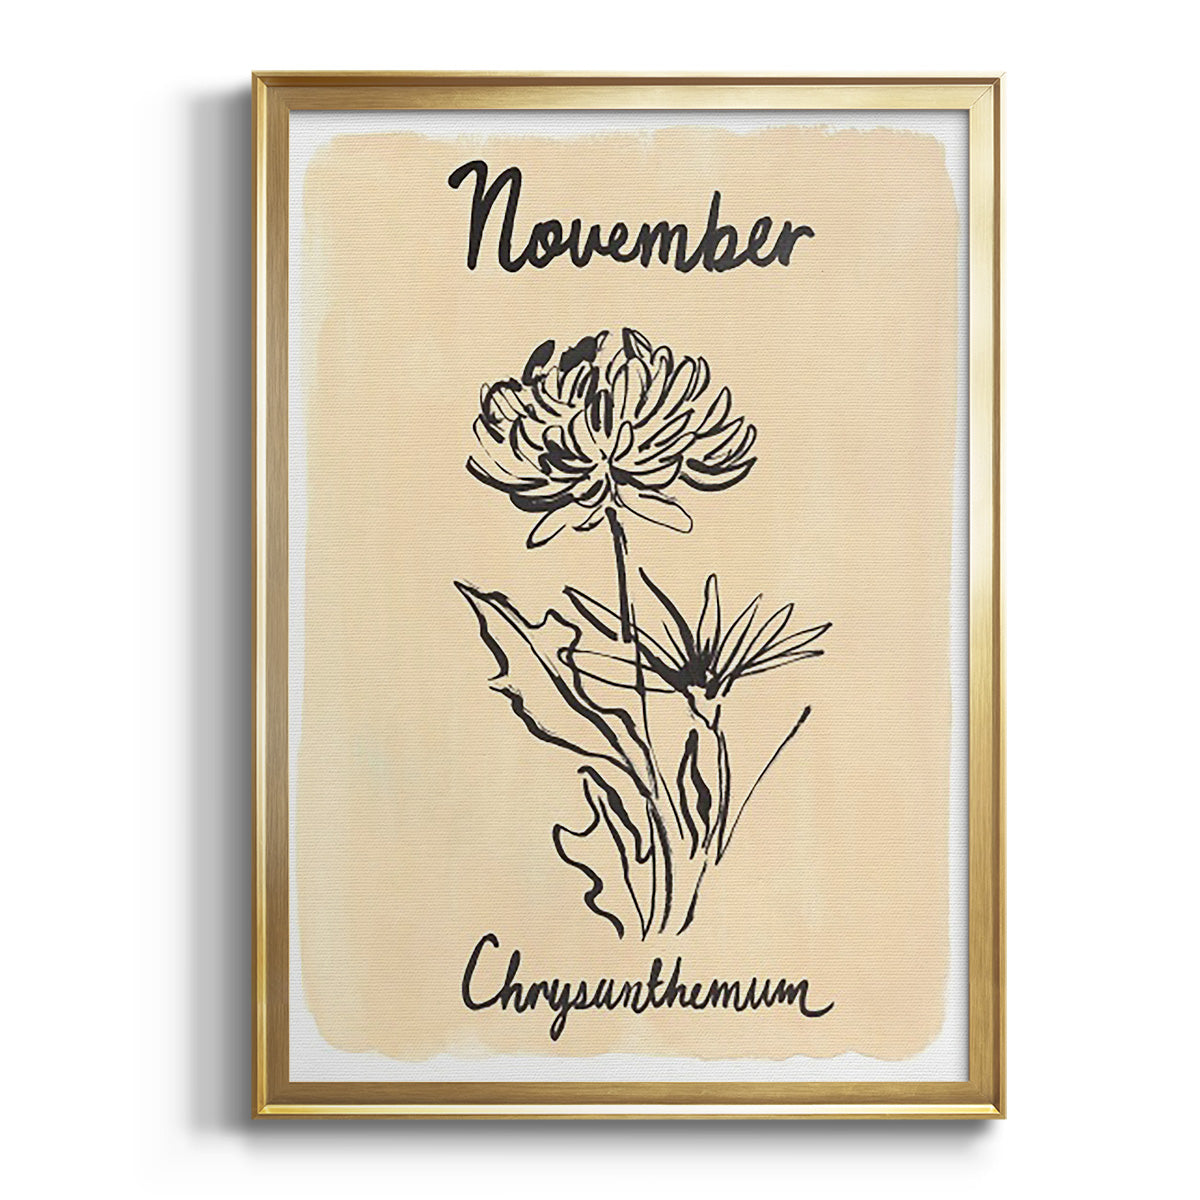 Birth Month XI Premium Framed Print - Ready to Hang